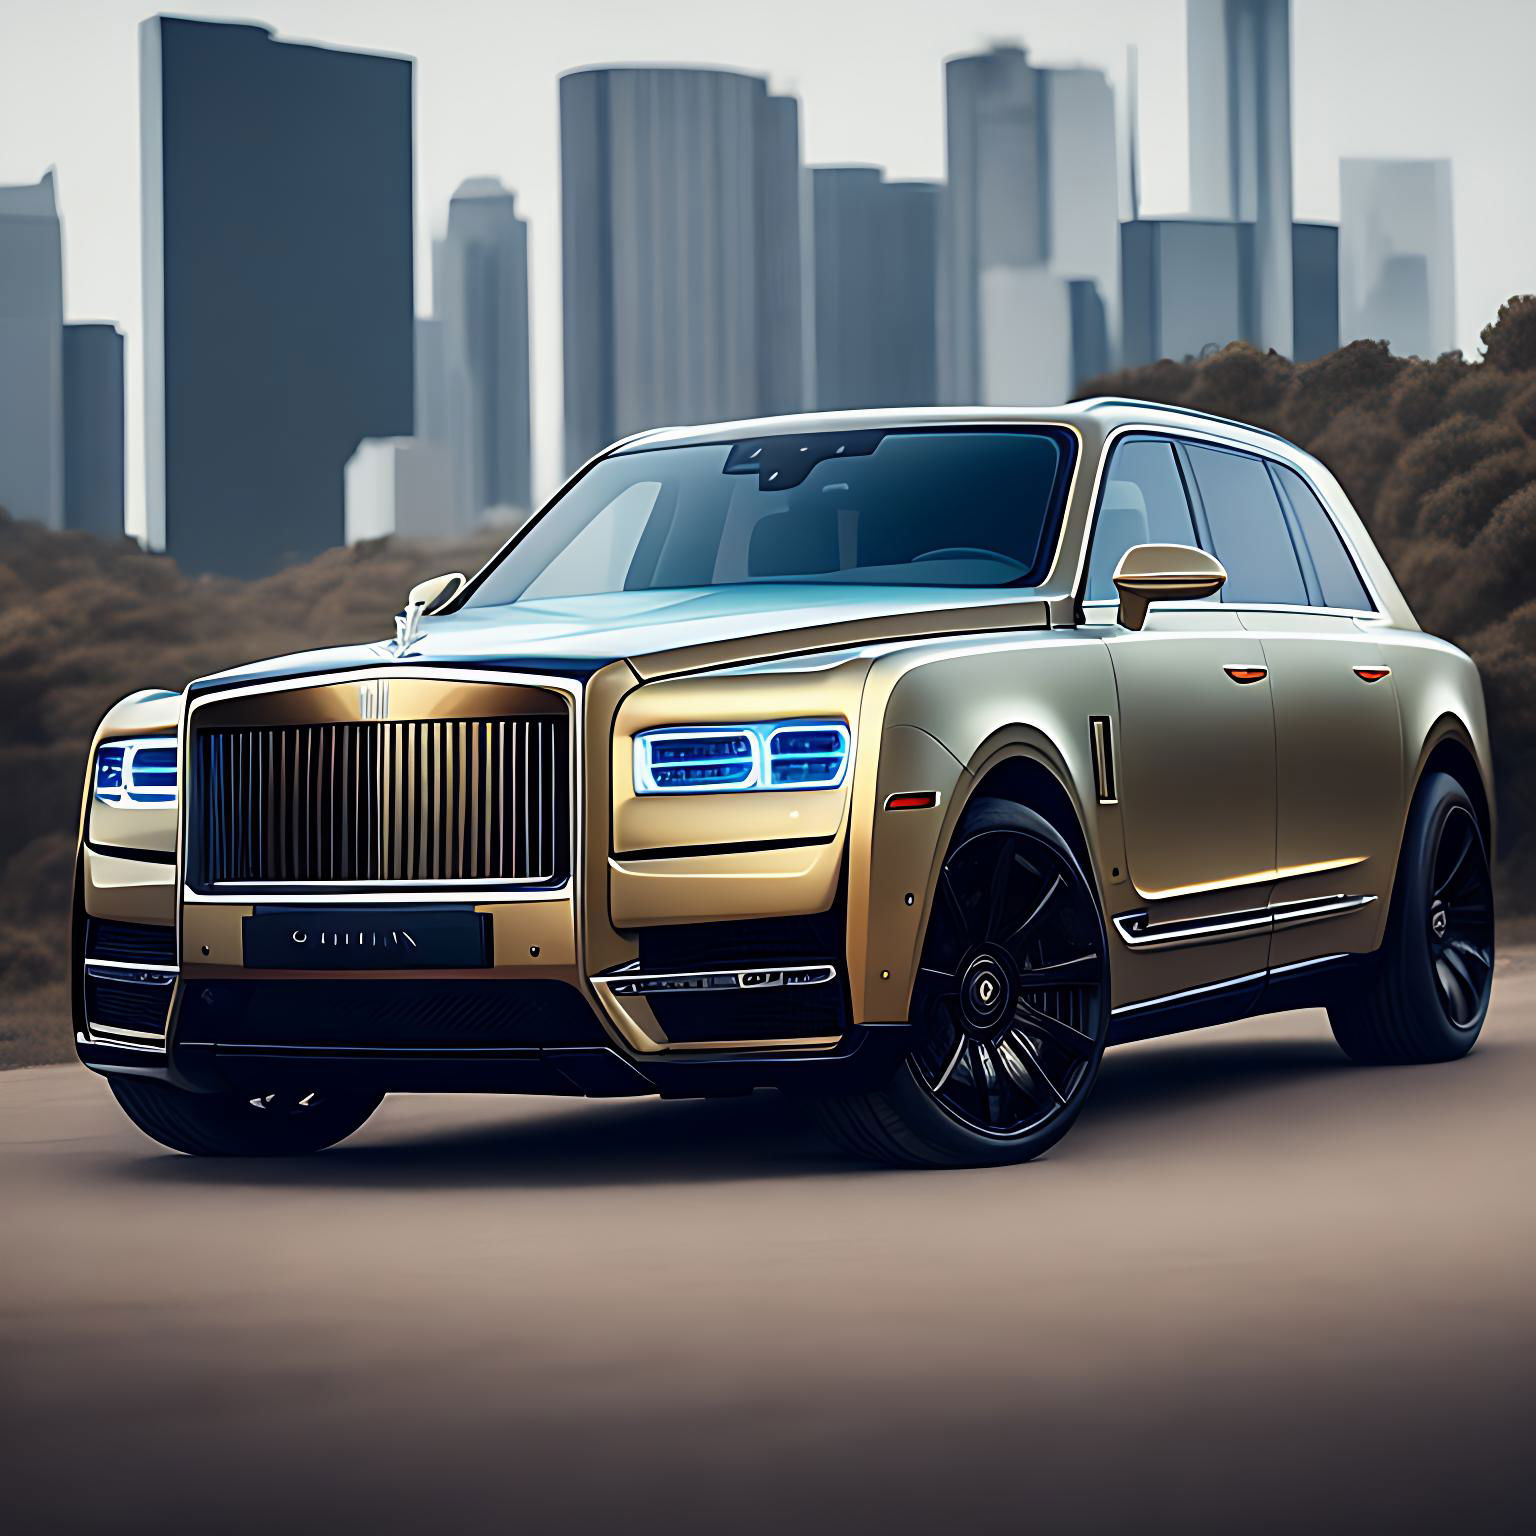 Cars and Horsepower short story, Vinnie and the Rolls-Royce Cullinan.